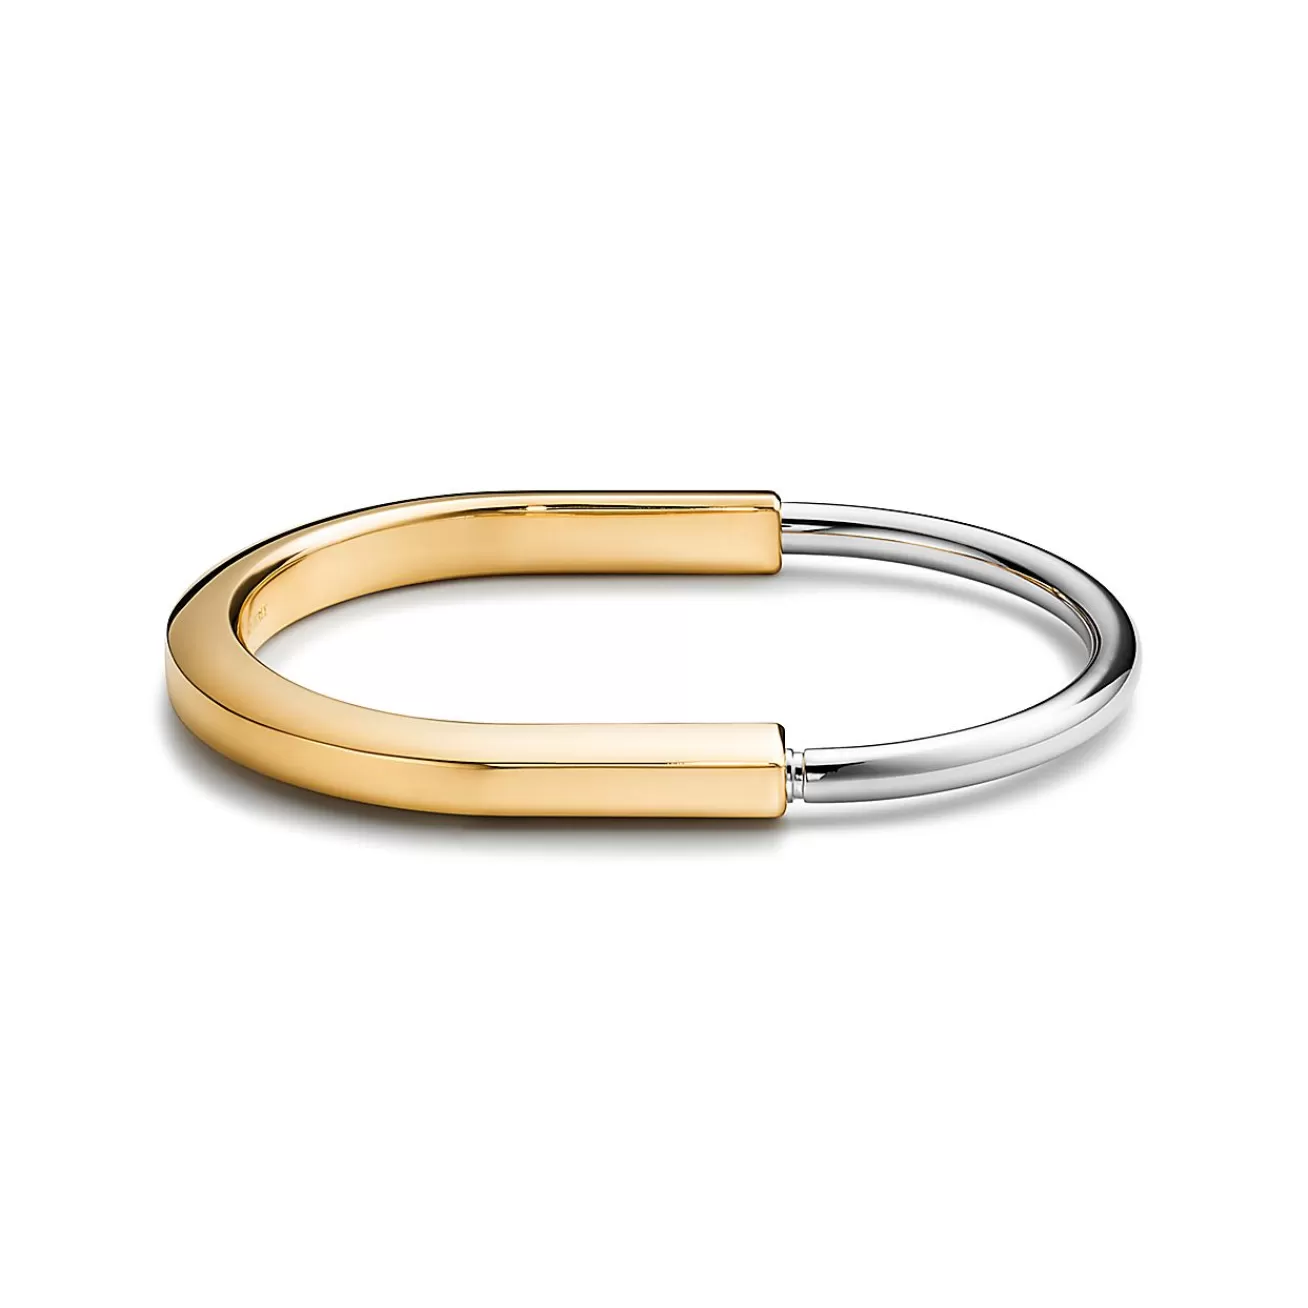 Tiffany & Co. Tiffany Lock Bangle in Yellow and White Gold | ^ Bracelets | Gifts for Her